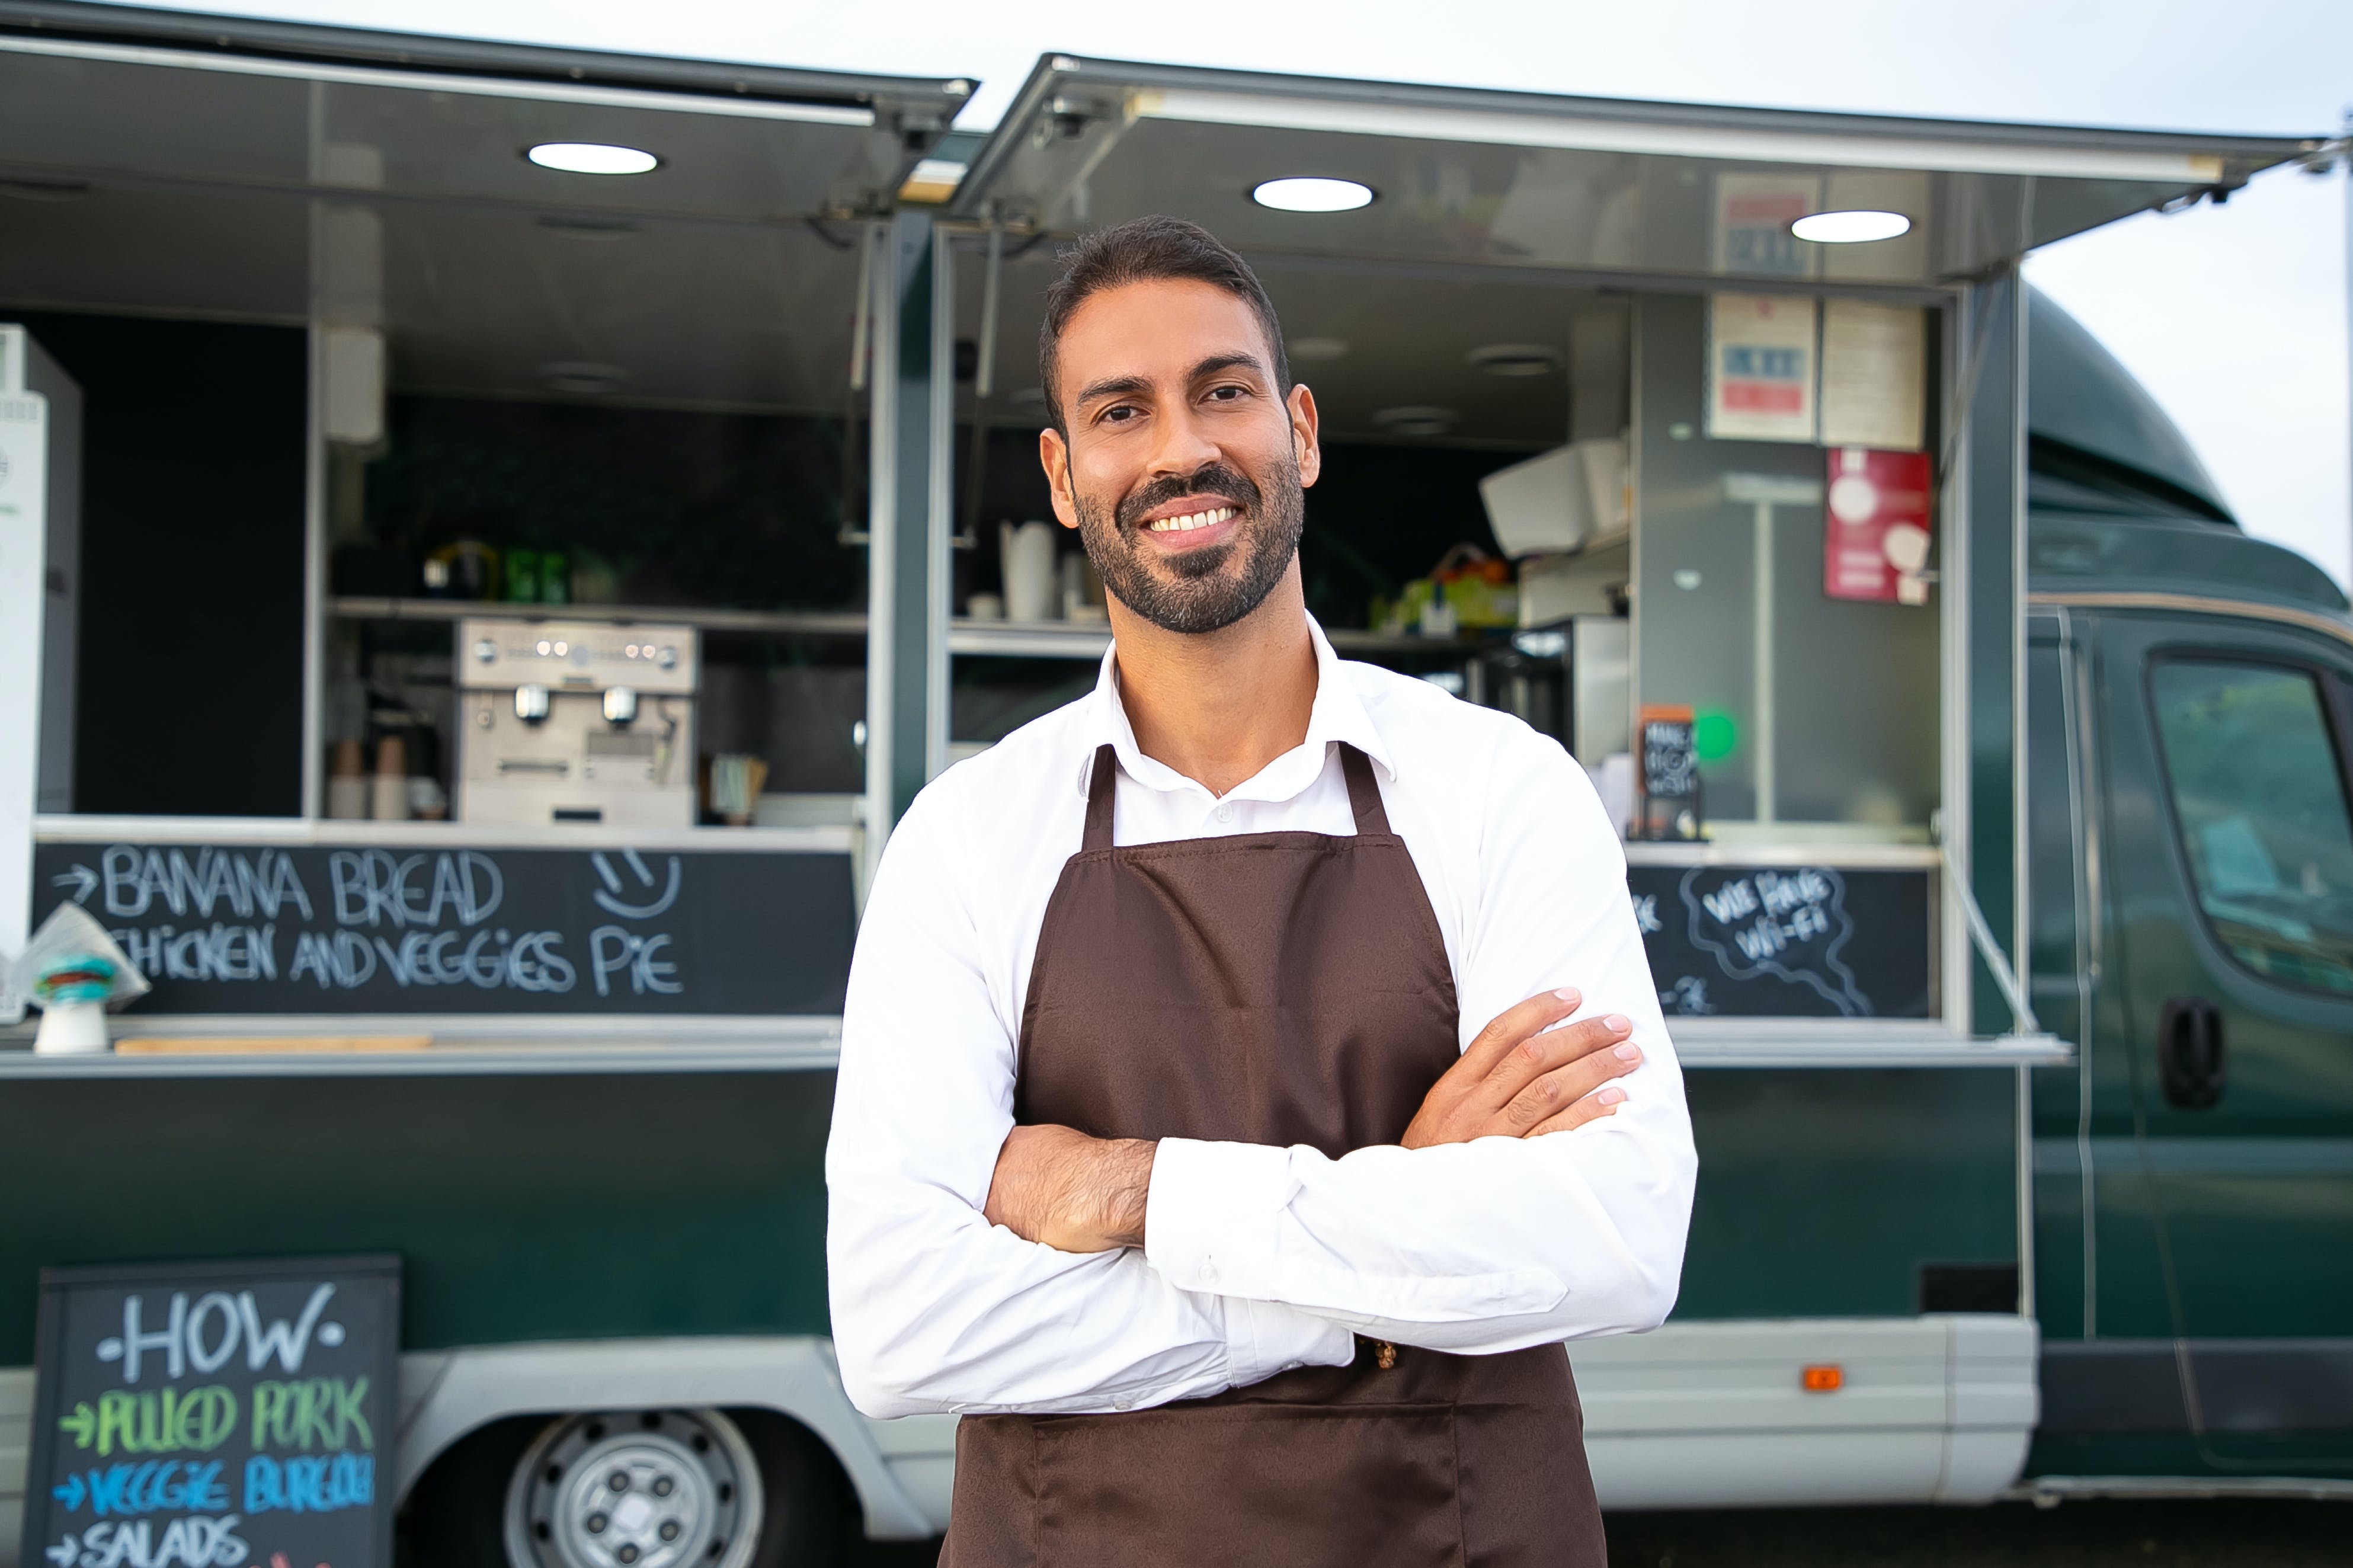 Business owner in front of food truck